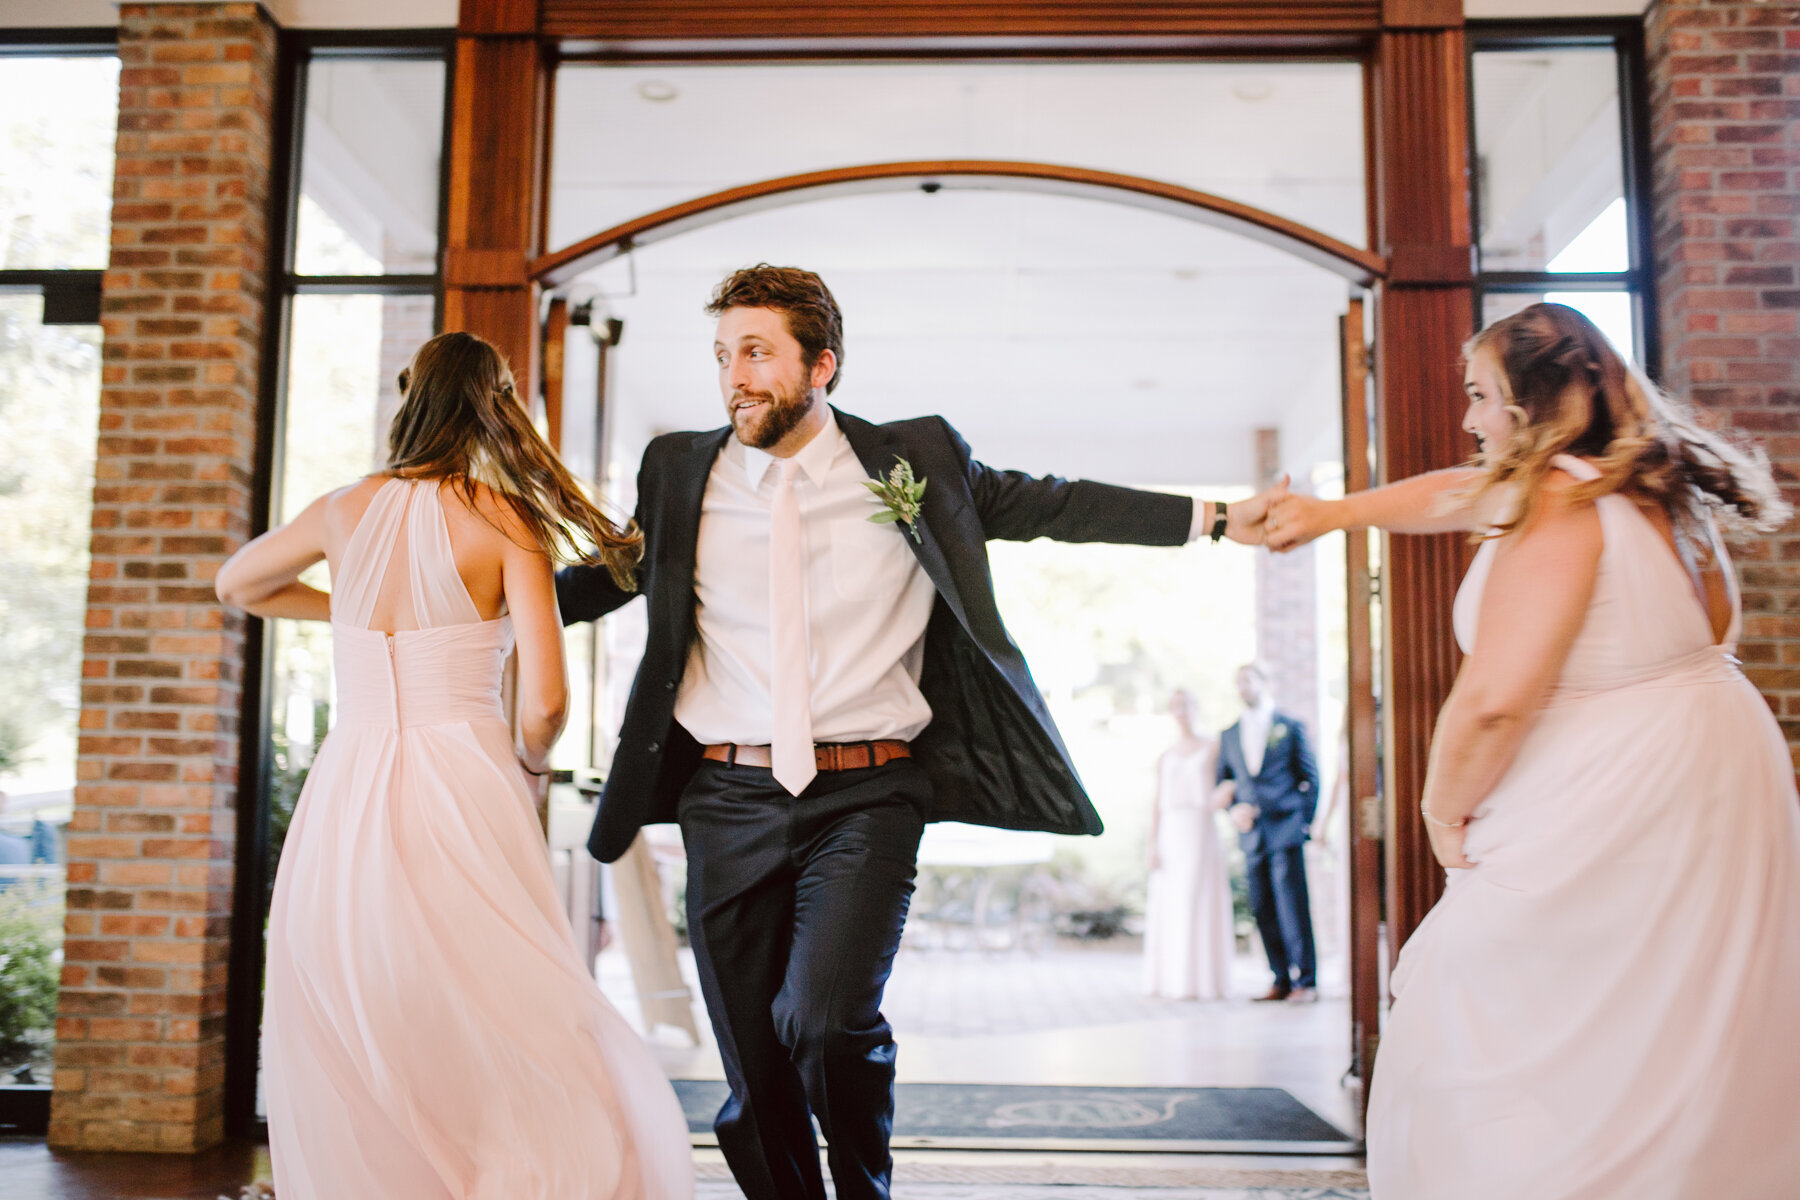 bridal party entrances after a sunny outdoor wedding at hunter valley farms in knoxville tennessee